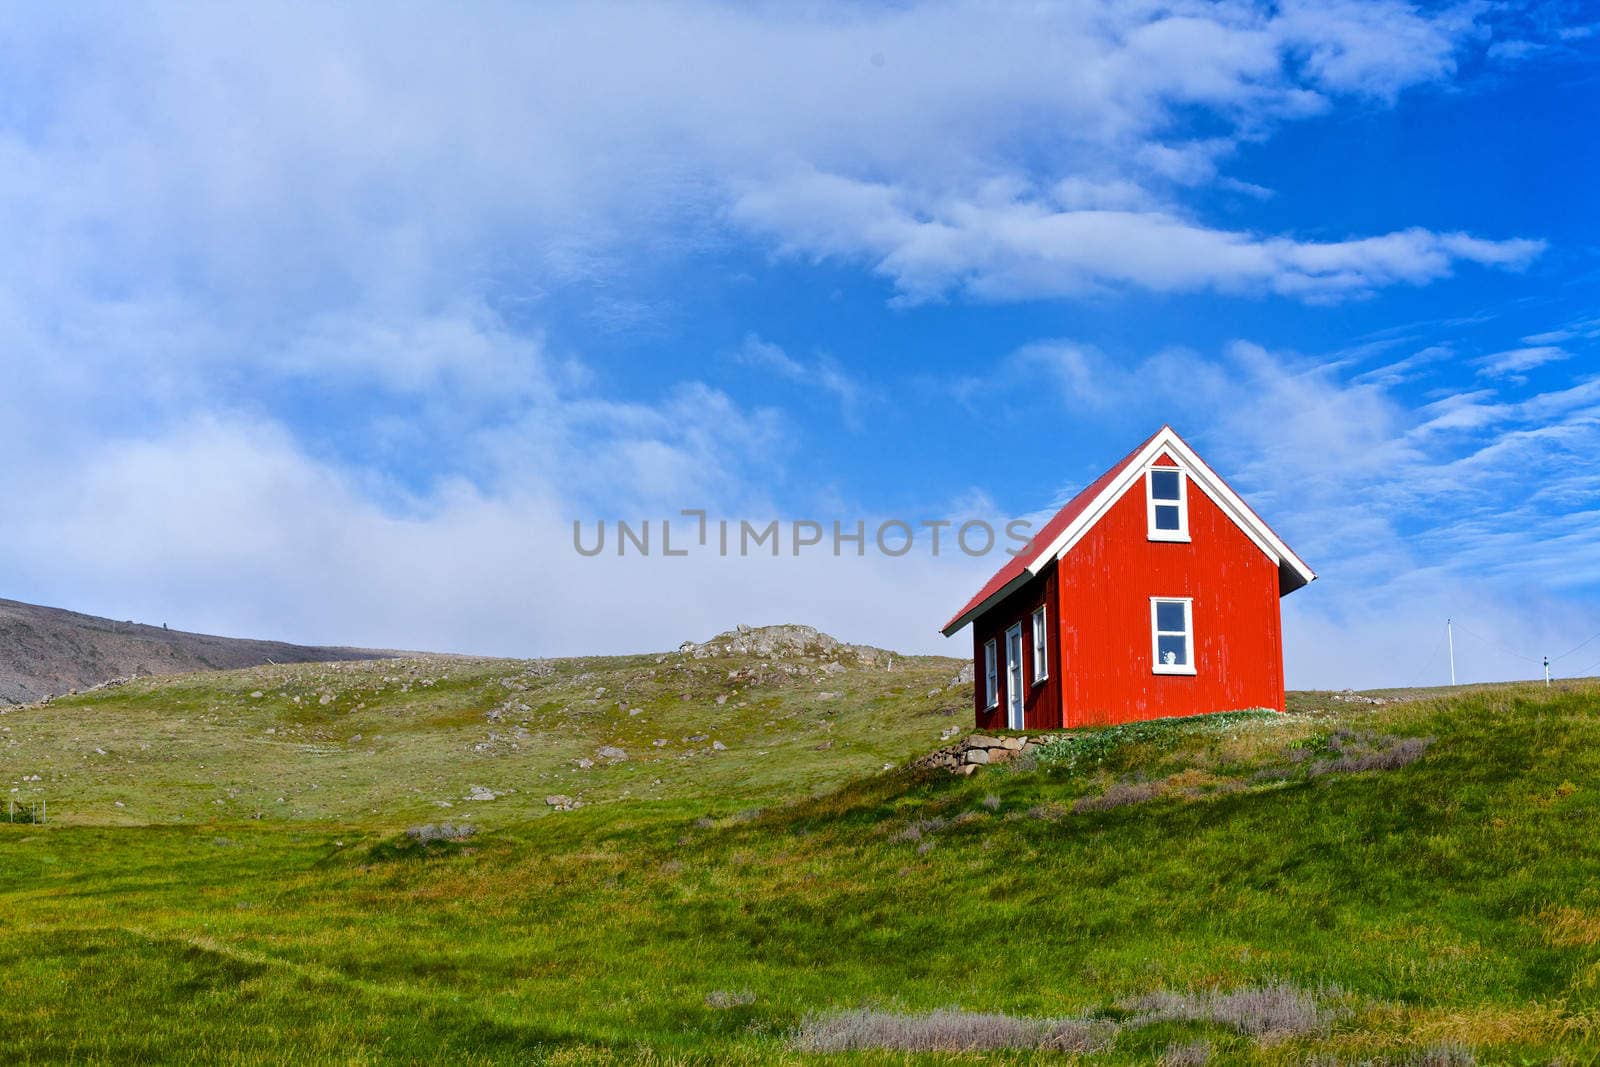 House in Iceland. by maxoliki